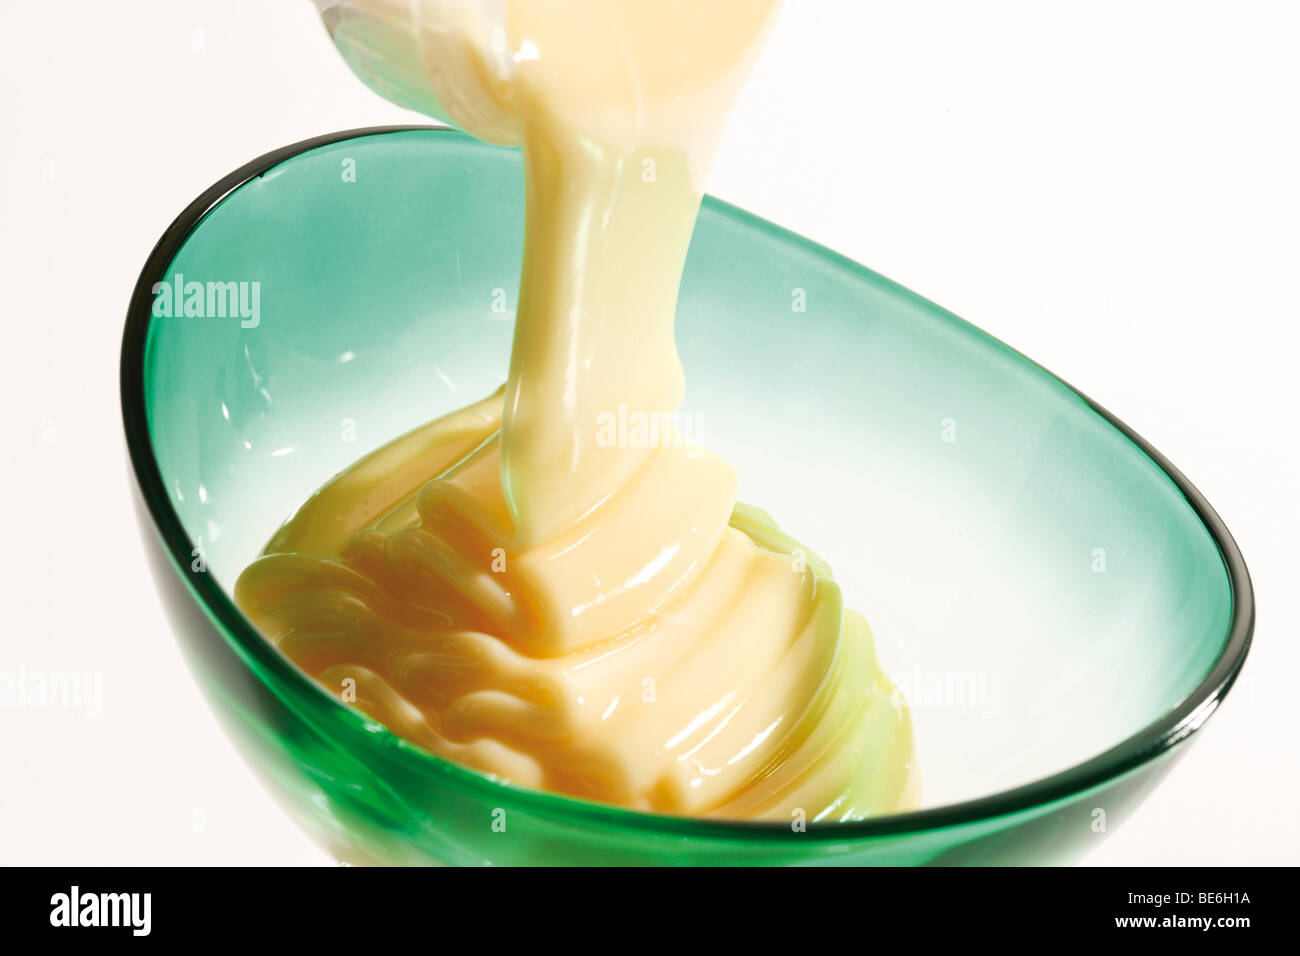 Vanilla pudding being filled into a glass bowl Stock Photo